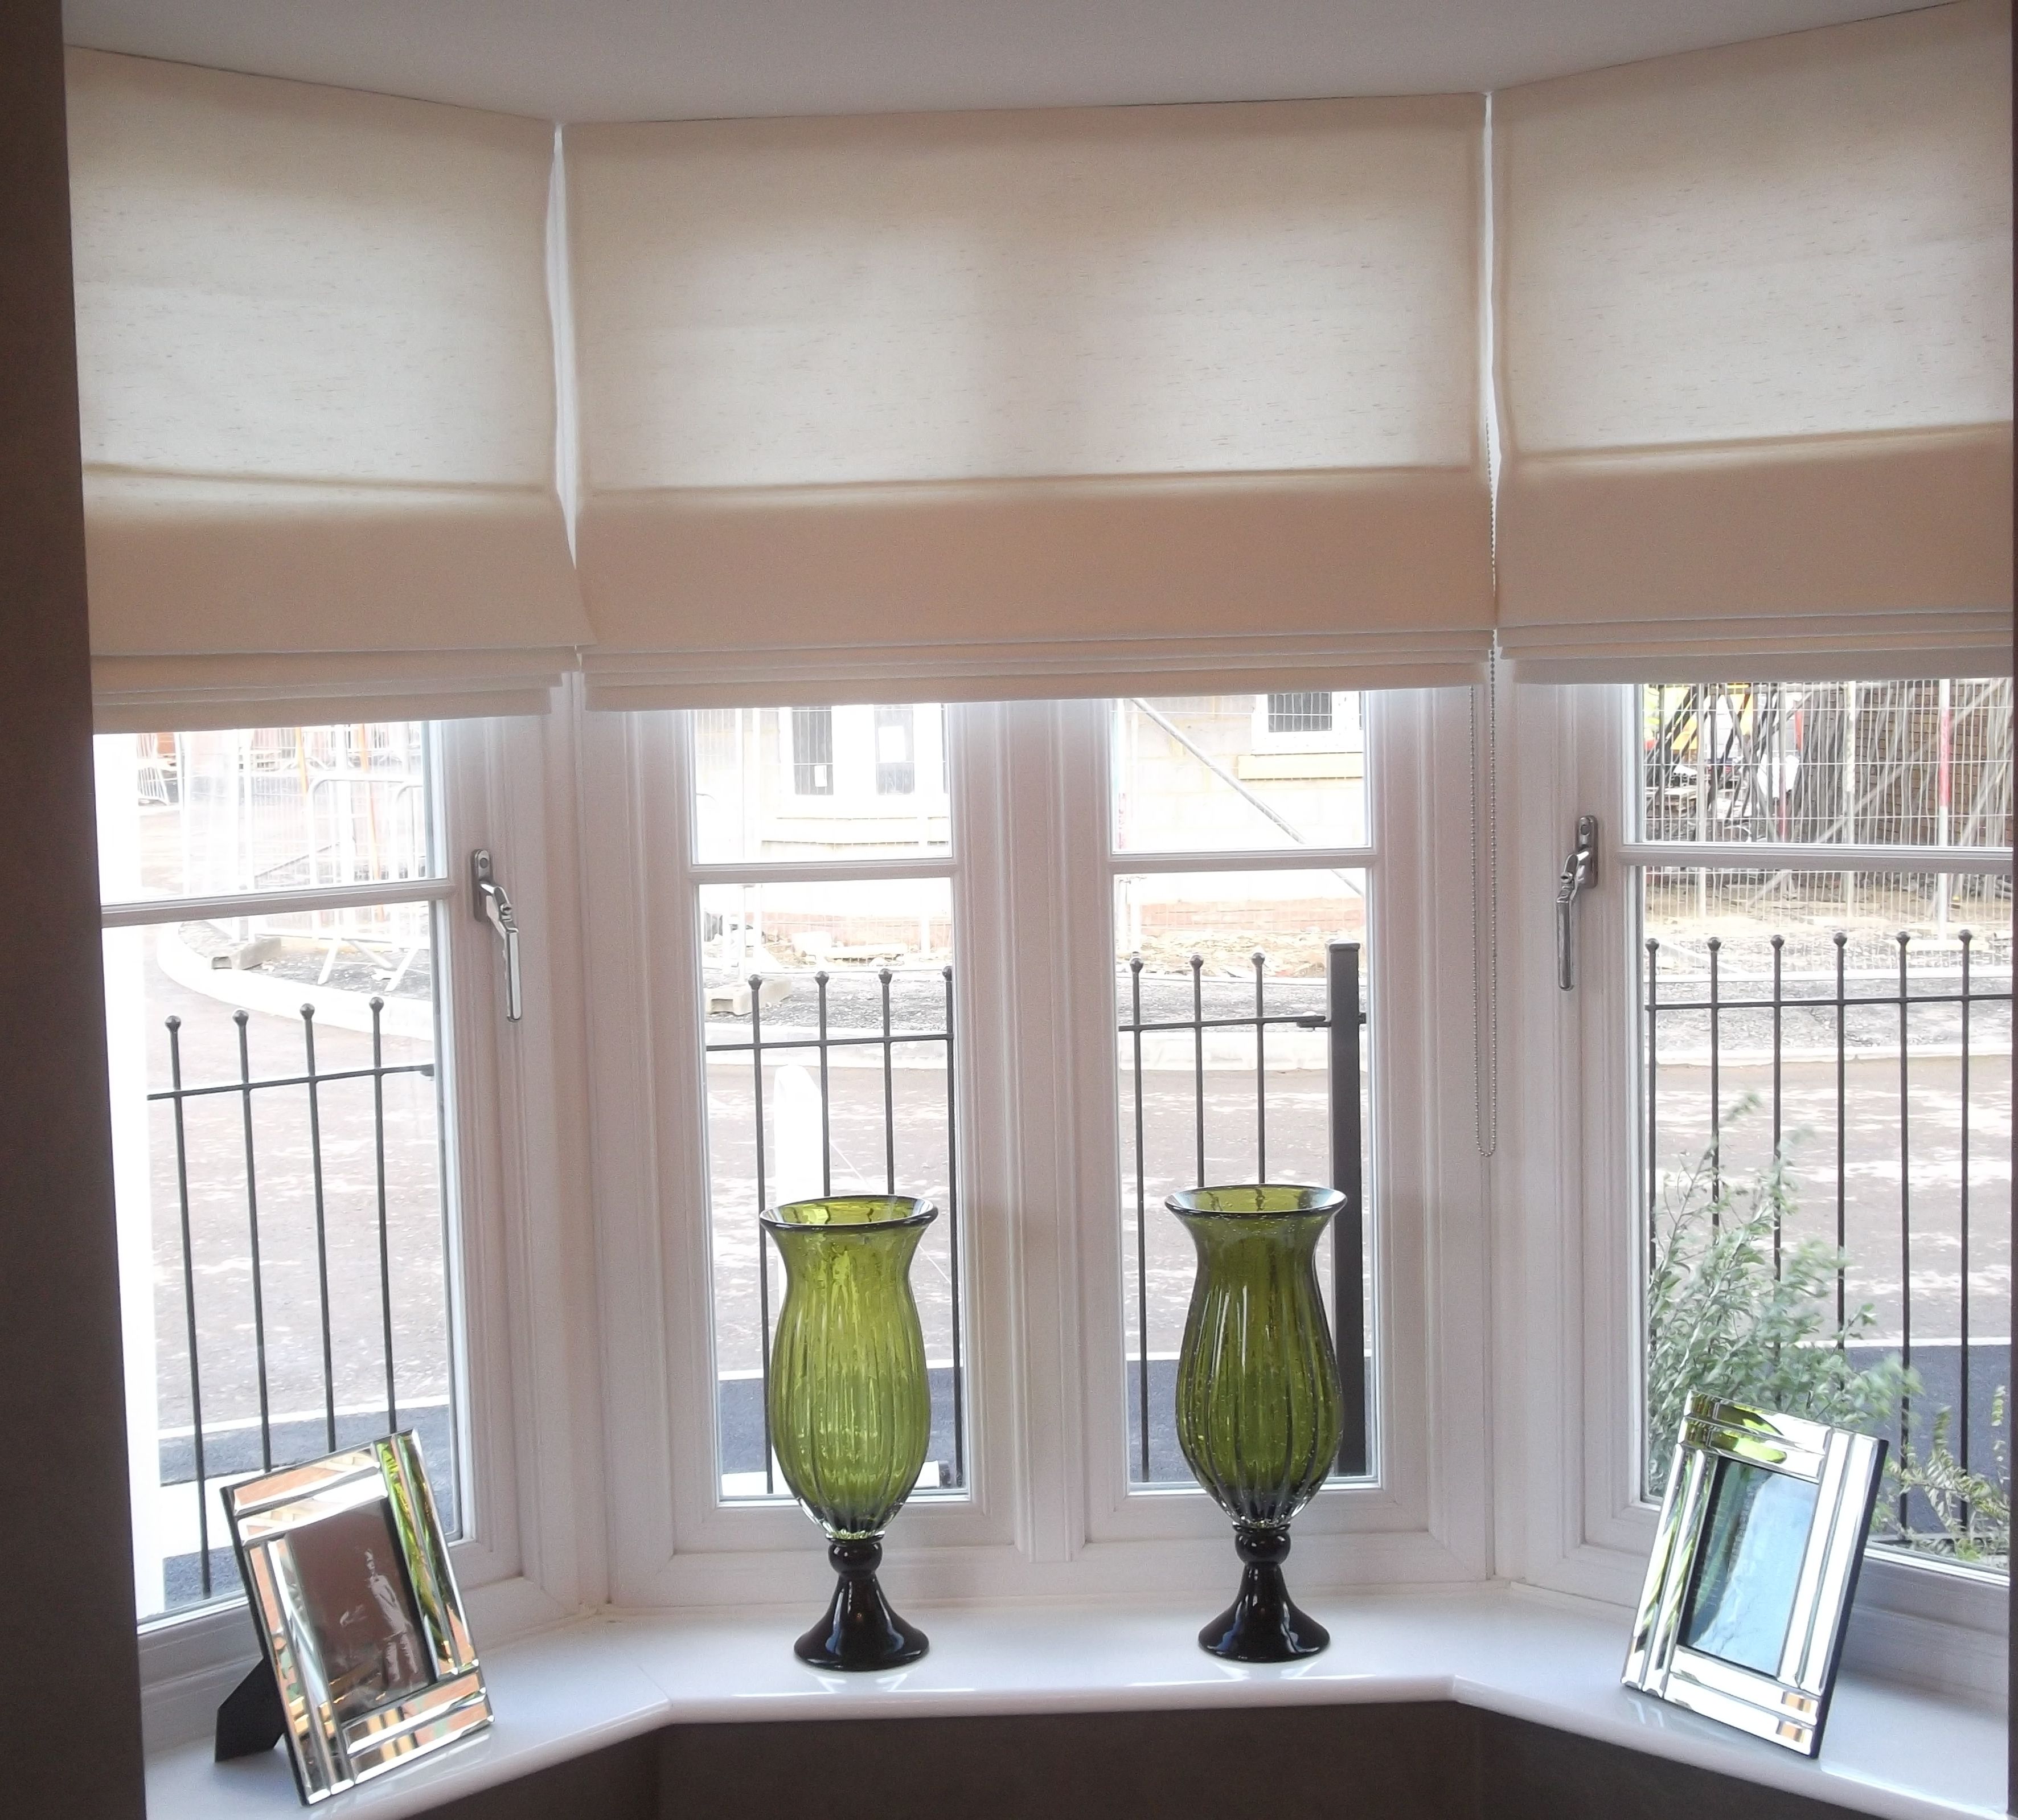 Dressing A Square Bay Window Is Quite A Challenge But When Intended For Bay Window Blinds And Curtains (View 13 of 15)